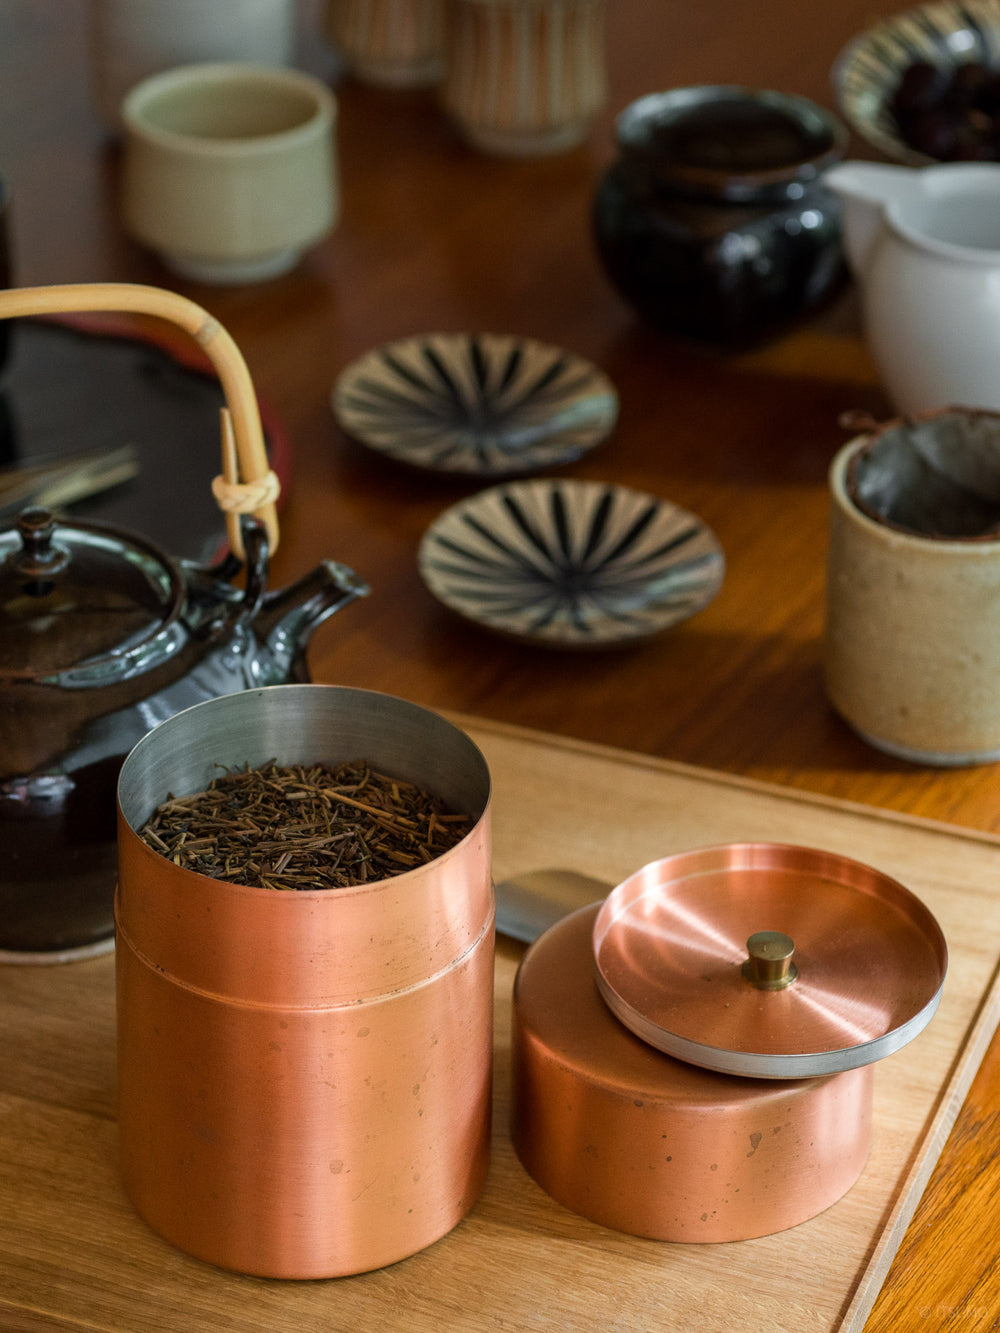 Azmaya copper tea canister filled with tea leaves next to a ceramic kettle and cups